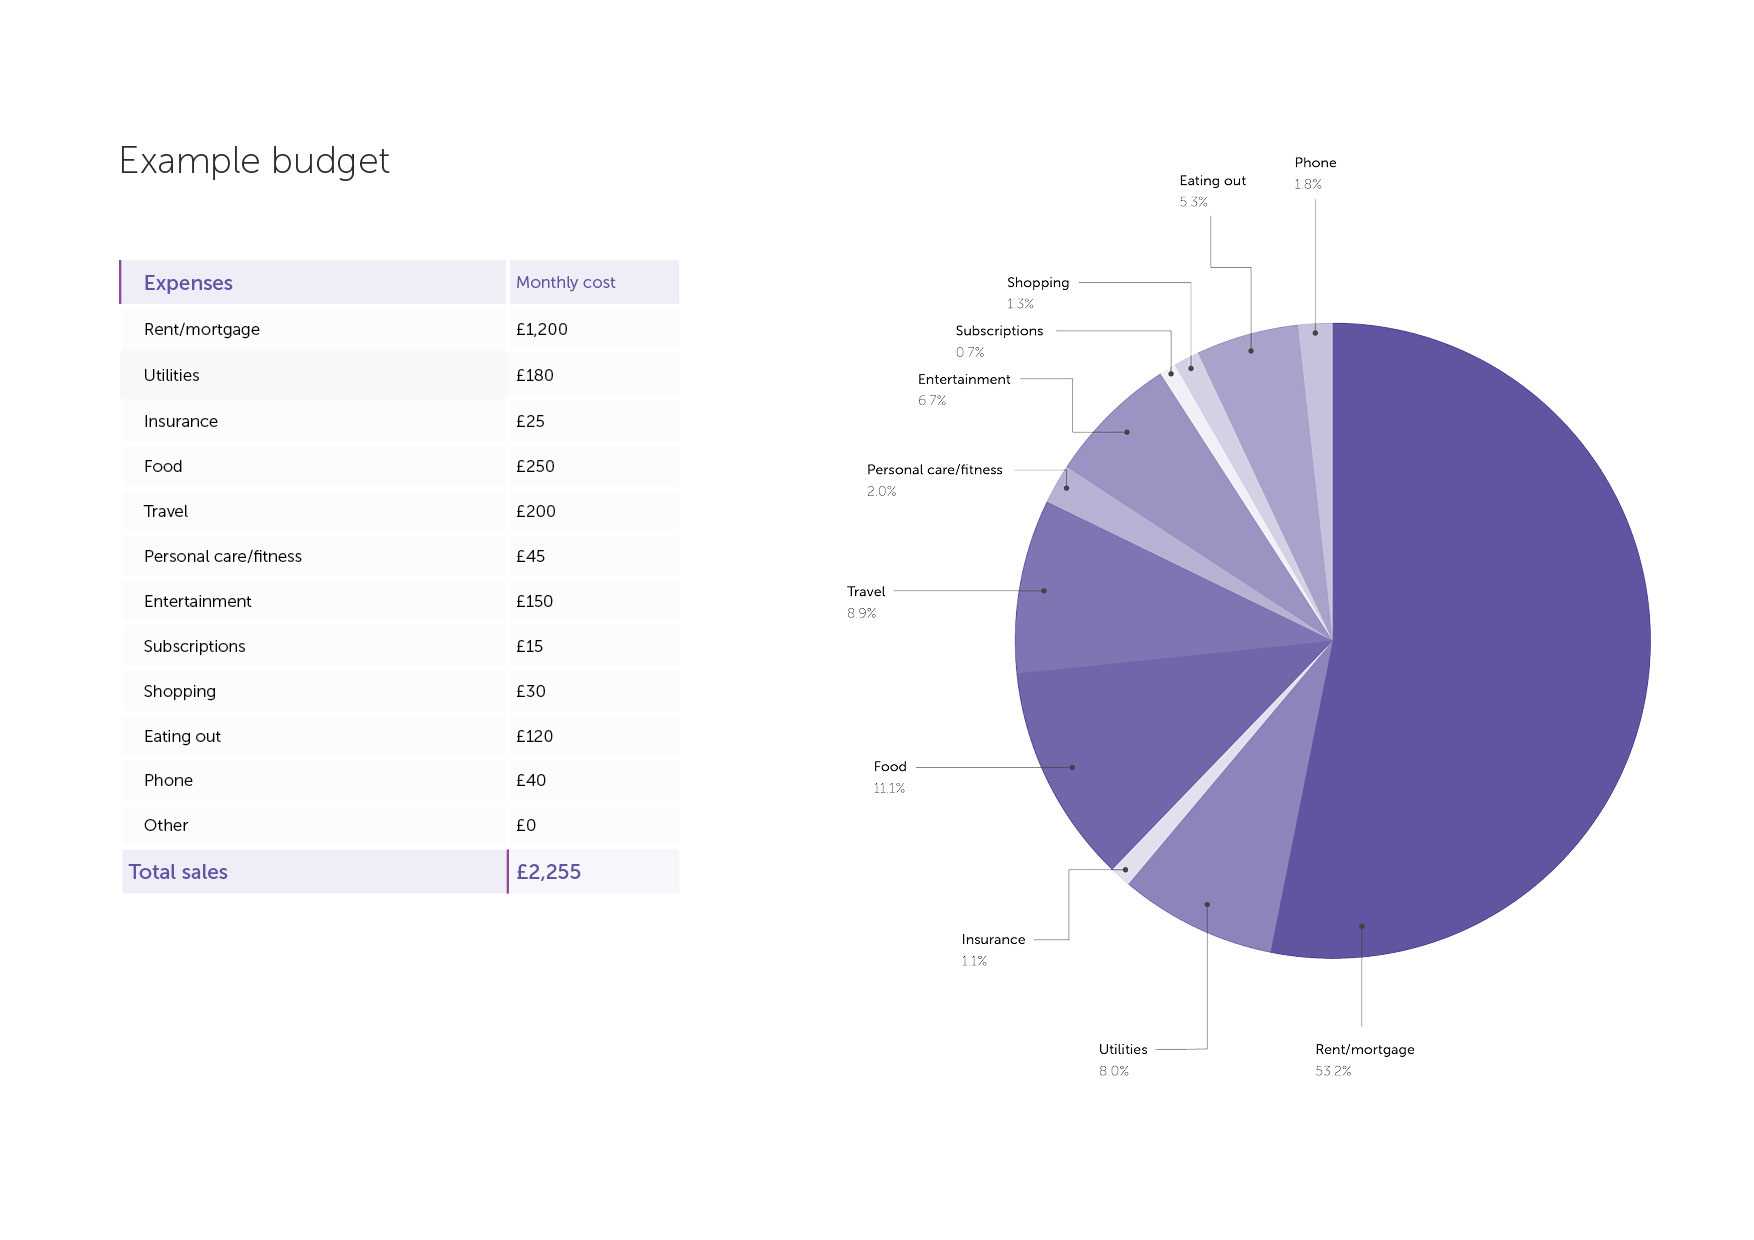 monthly budget example pie chart